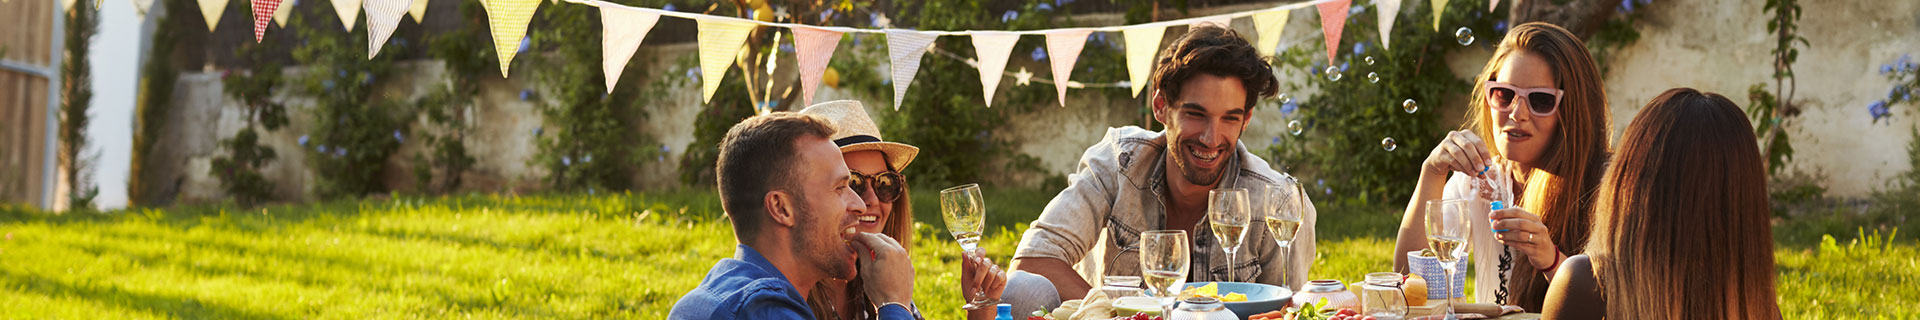 <p>How to get your garden ready for summer entertaining</p>
